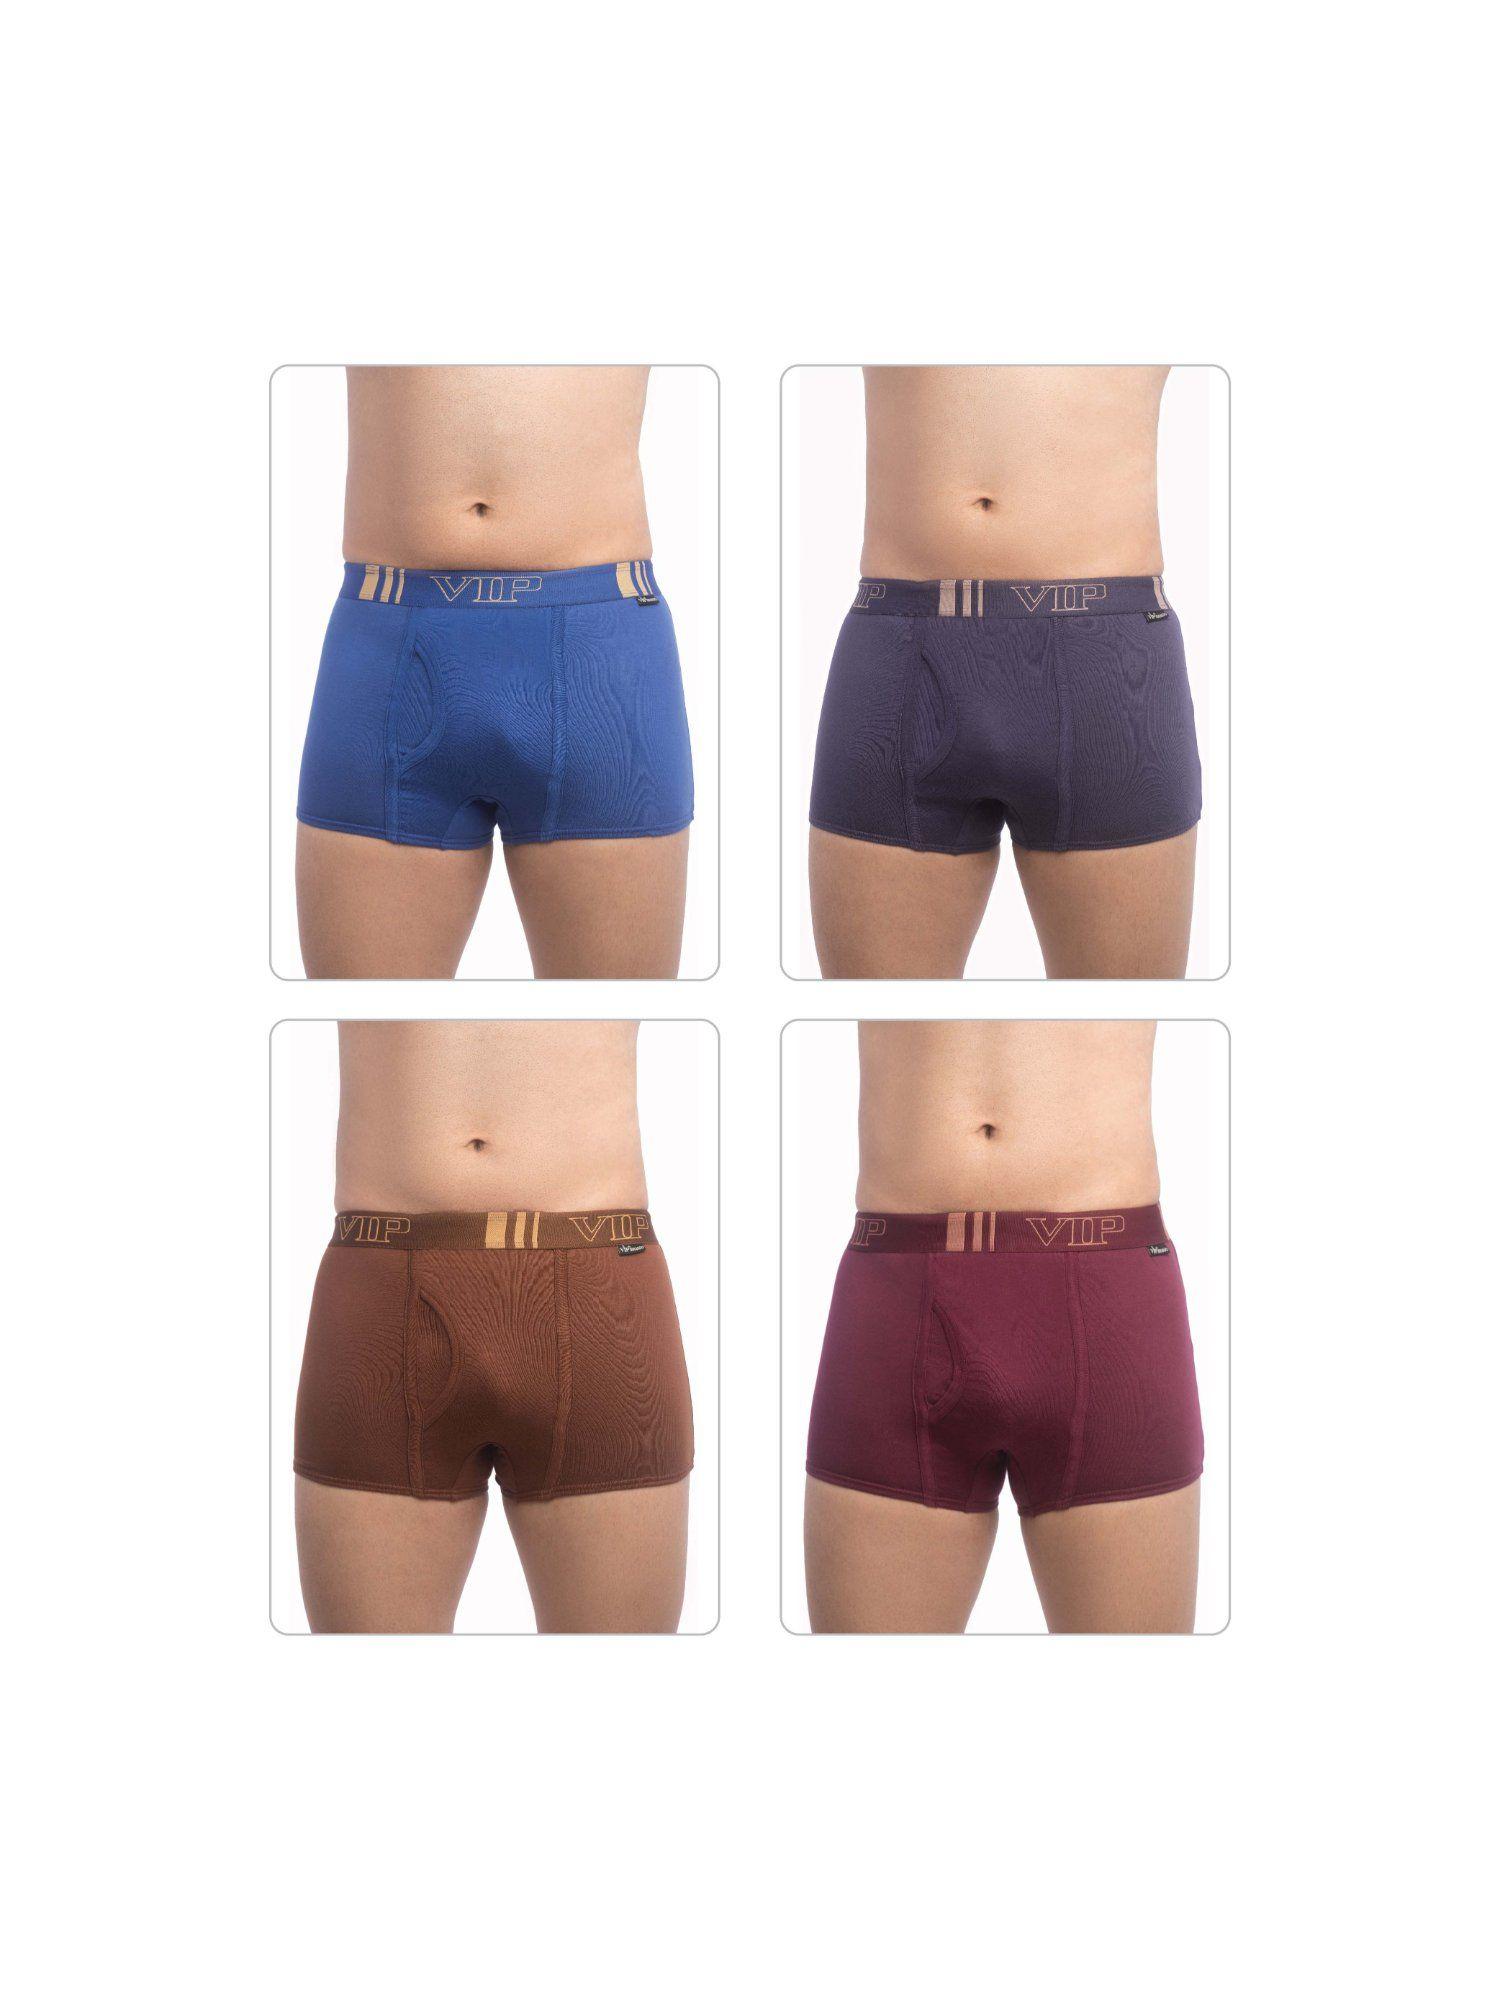 mens cotton brando plain trunks, colors & prints may vary (pack of 4)